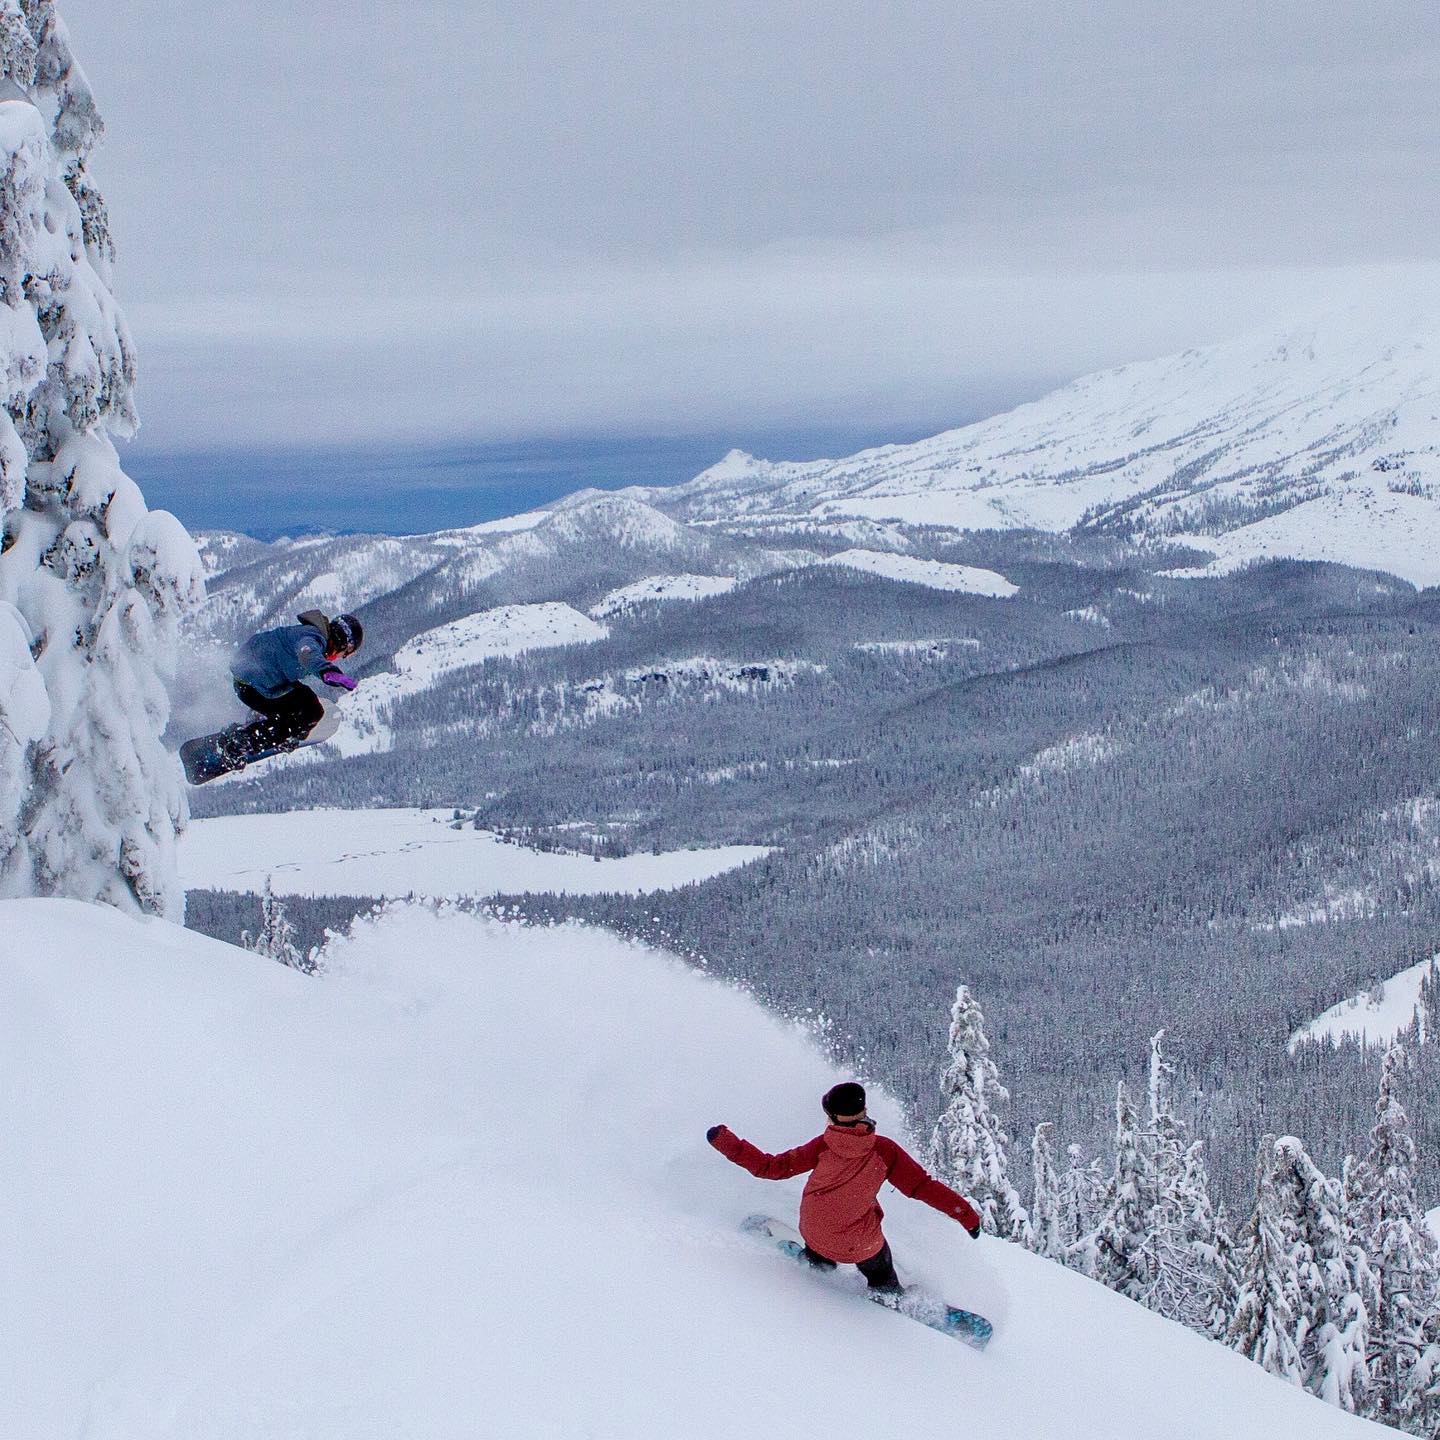 Two snowboarders on Mount Bachelor.